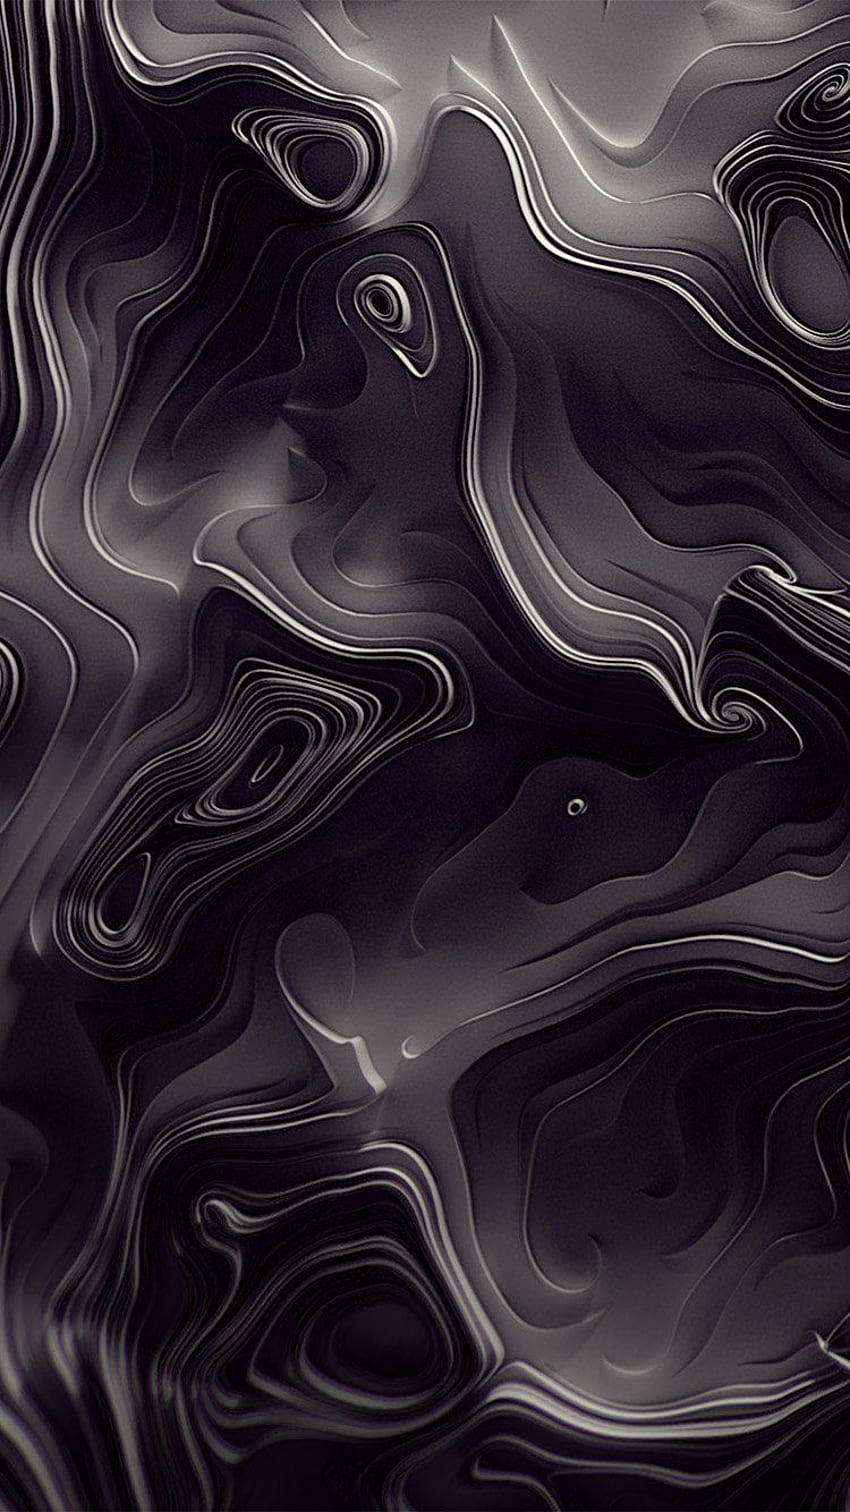 Get /2mFW2PQ map curves dark pattern background via Wallp. Abstract, Background patterns, iPhone HD phone wallpaper